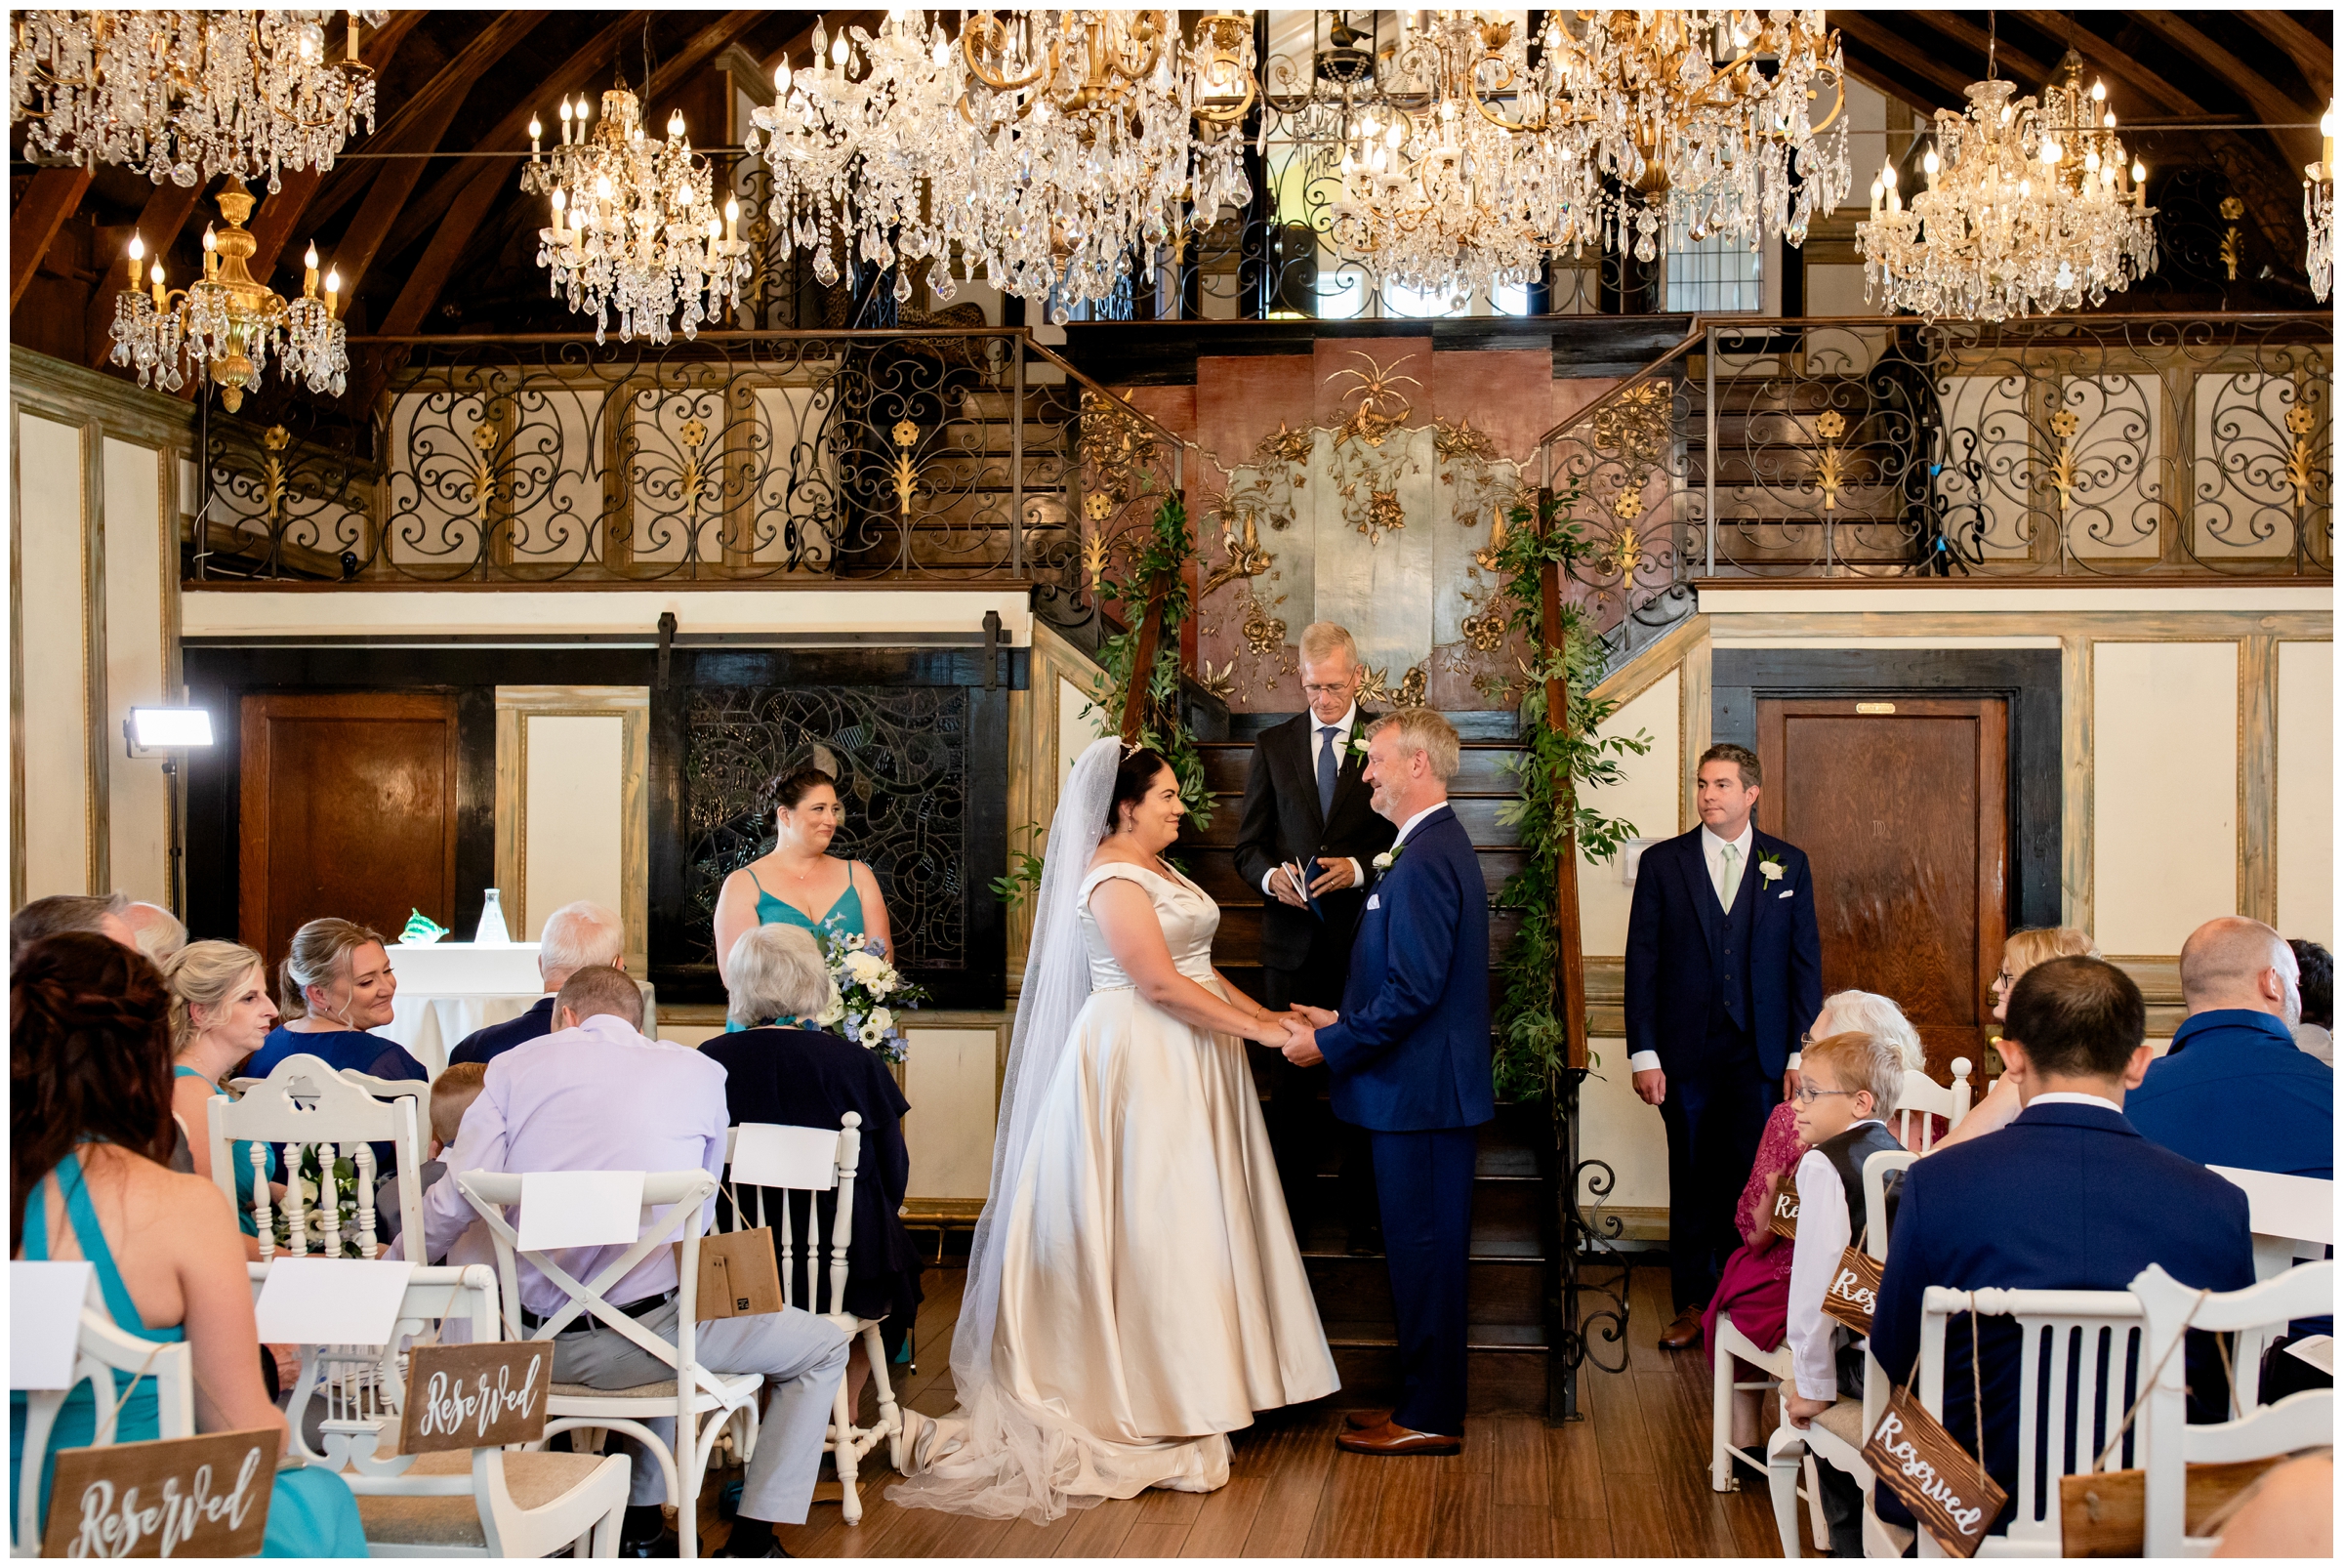 wedding ceremony at the Chandelier Barn in Colorado at Lionsgate Event Center 